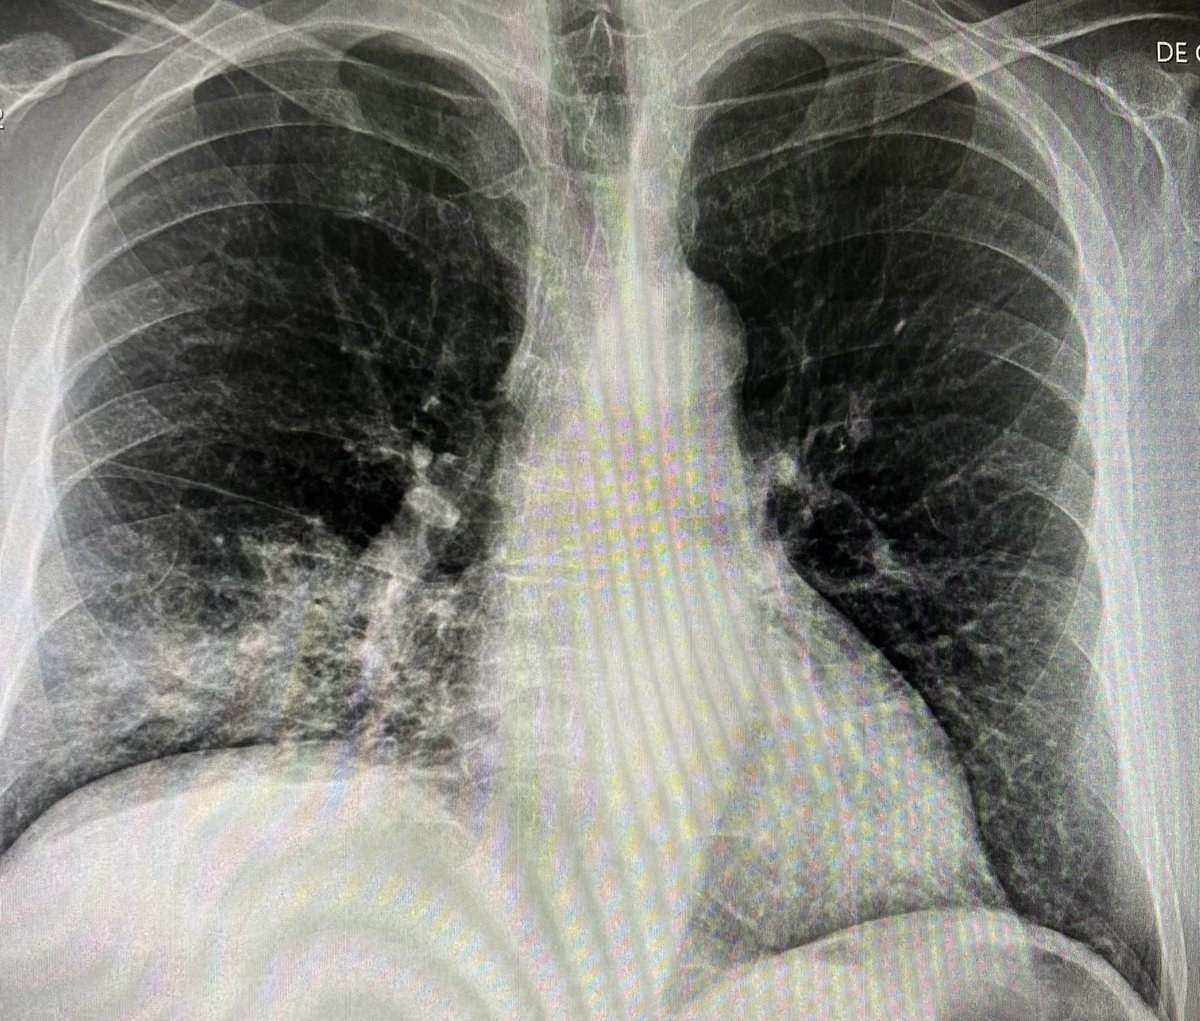 Just successfully treated a COVId-19 positive patient with pneumonia and pulse ox 84% on room air because he refused to be admitted and treated with Remdesivir. He knew it was liver toxic and has had a liver transplant. The admitting doctor wanted to give it anyway. He is now…